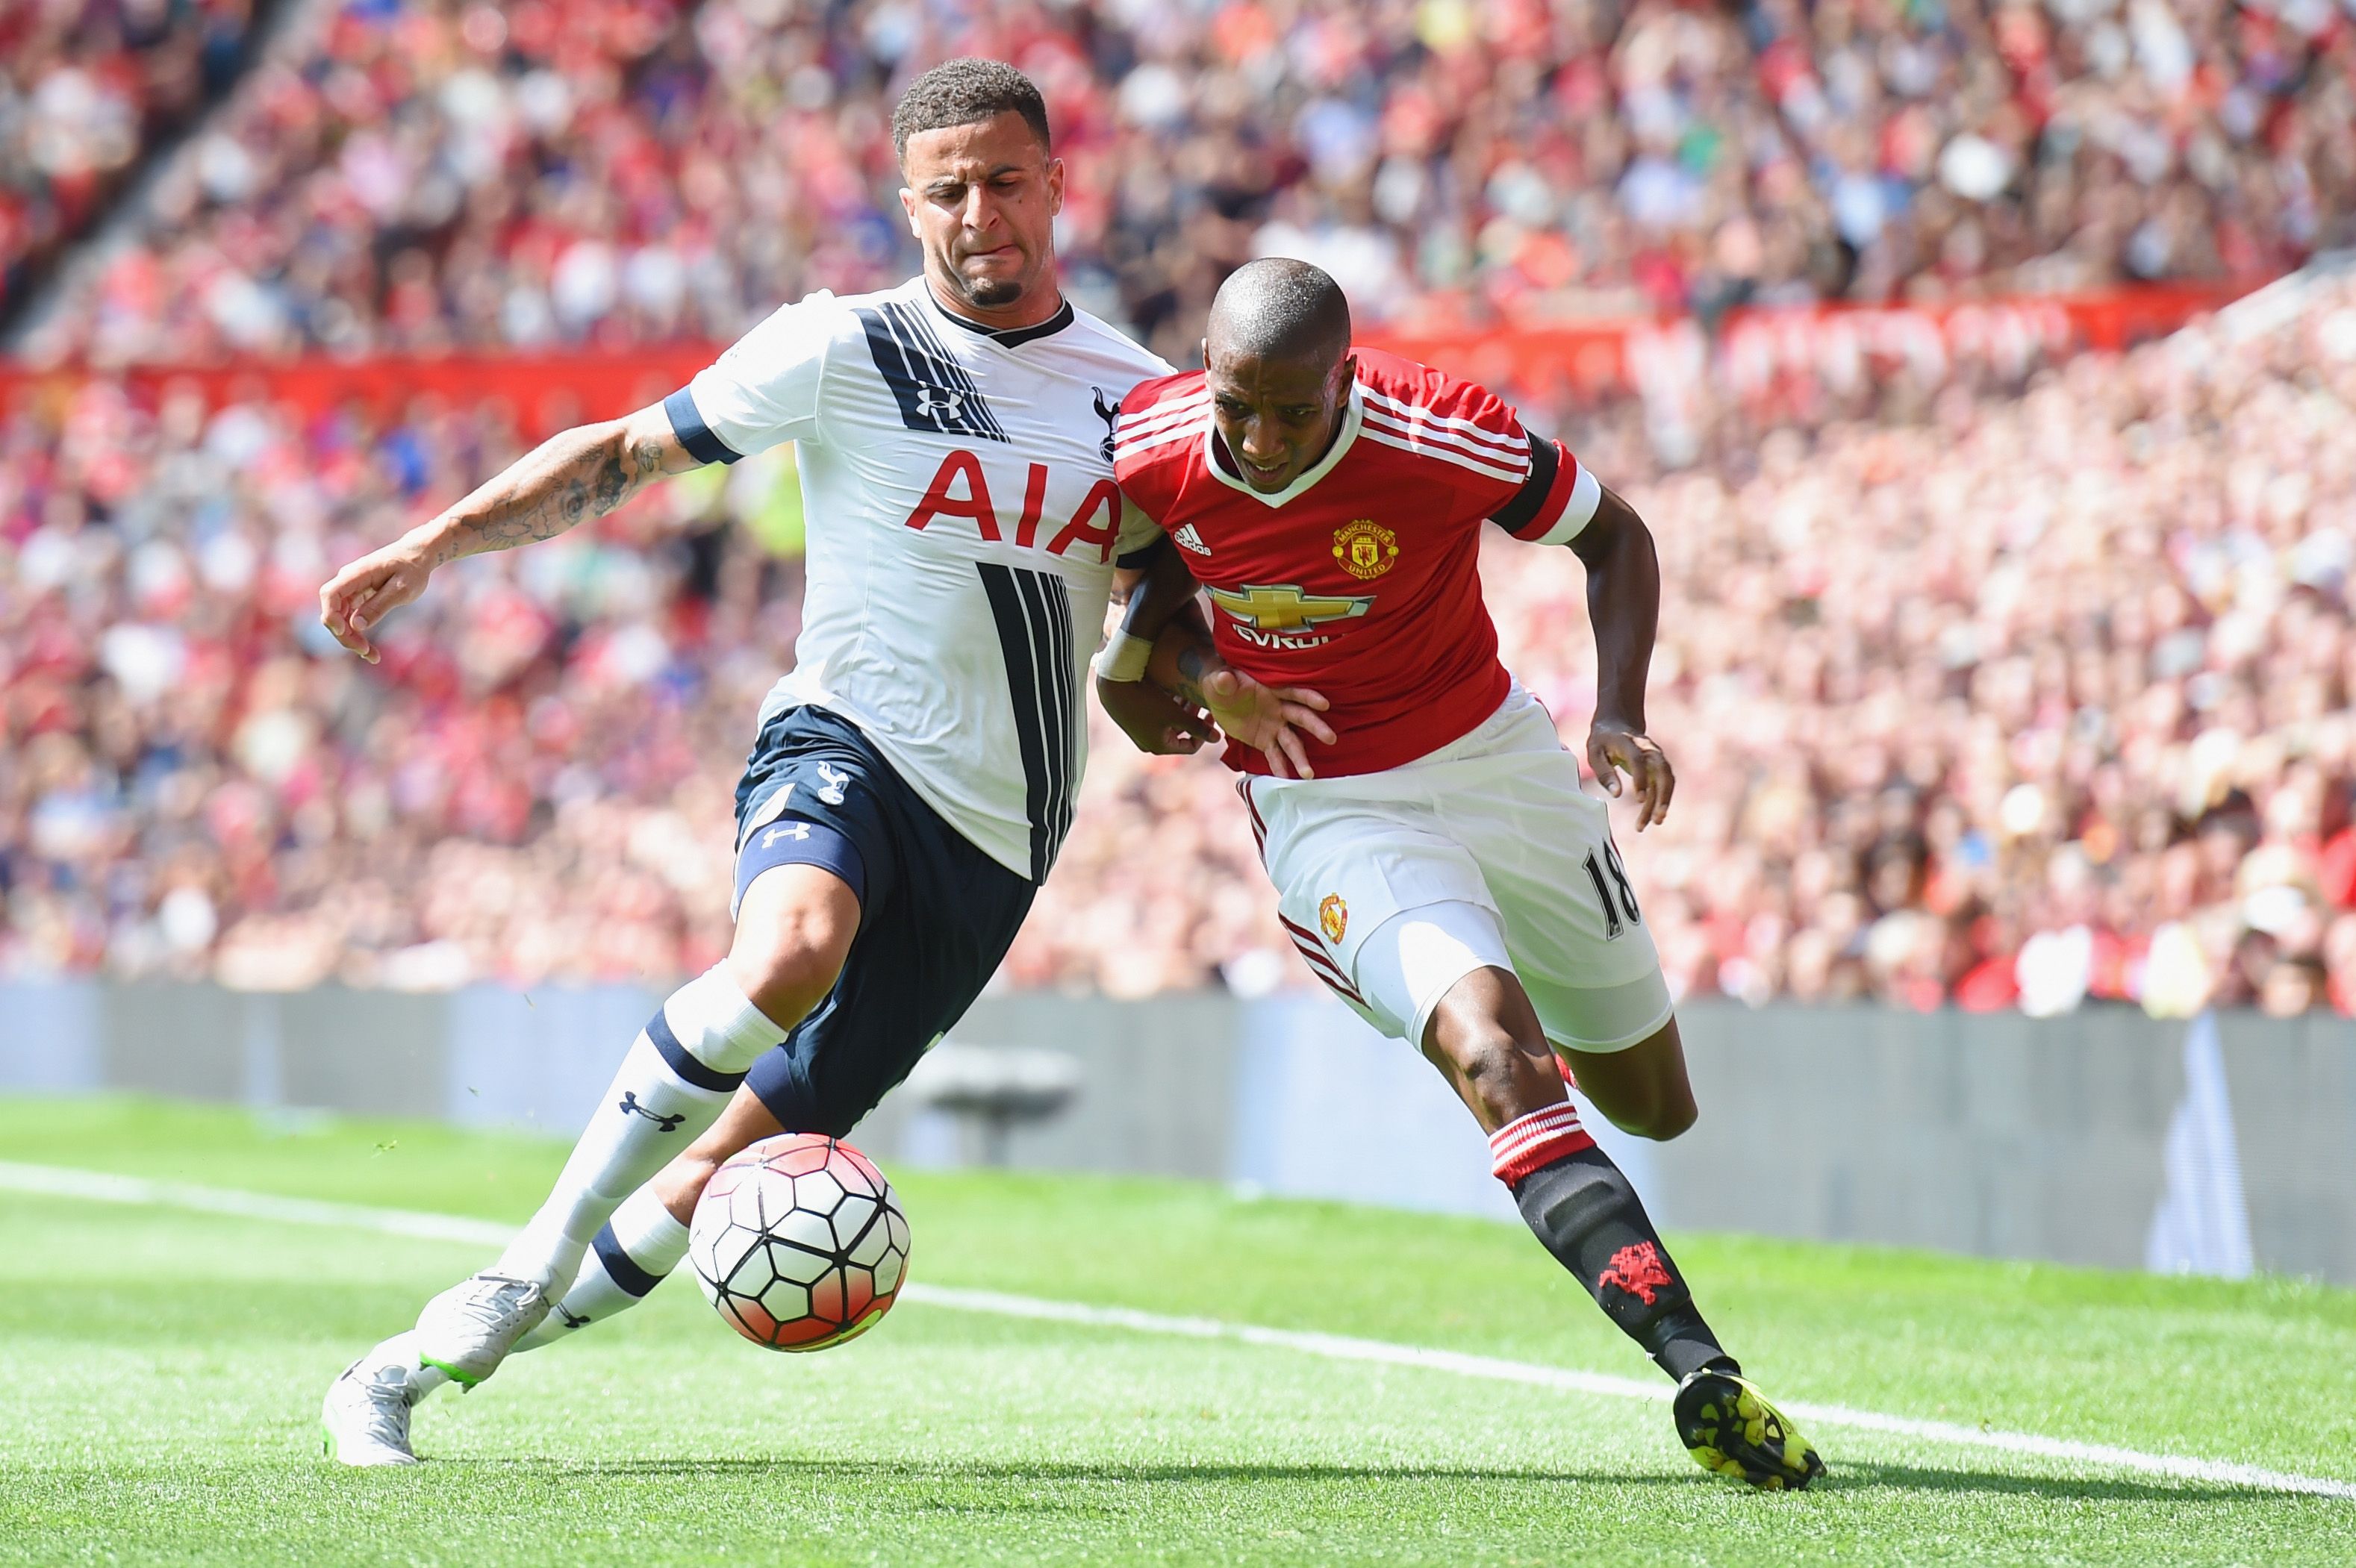 MANCHESTER, ENGLAND - AUGUST 08: Kyle Walker of Tottenham and Ashley Young of Manchester United in action during the Barclays Premier League match between Manchester United and and Tottingham Hotspur at Old Trafford, Manchester. (Photo by Michael Regan/Getty Images)